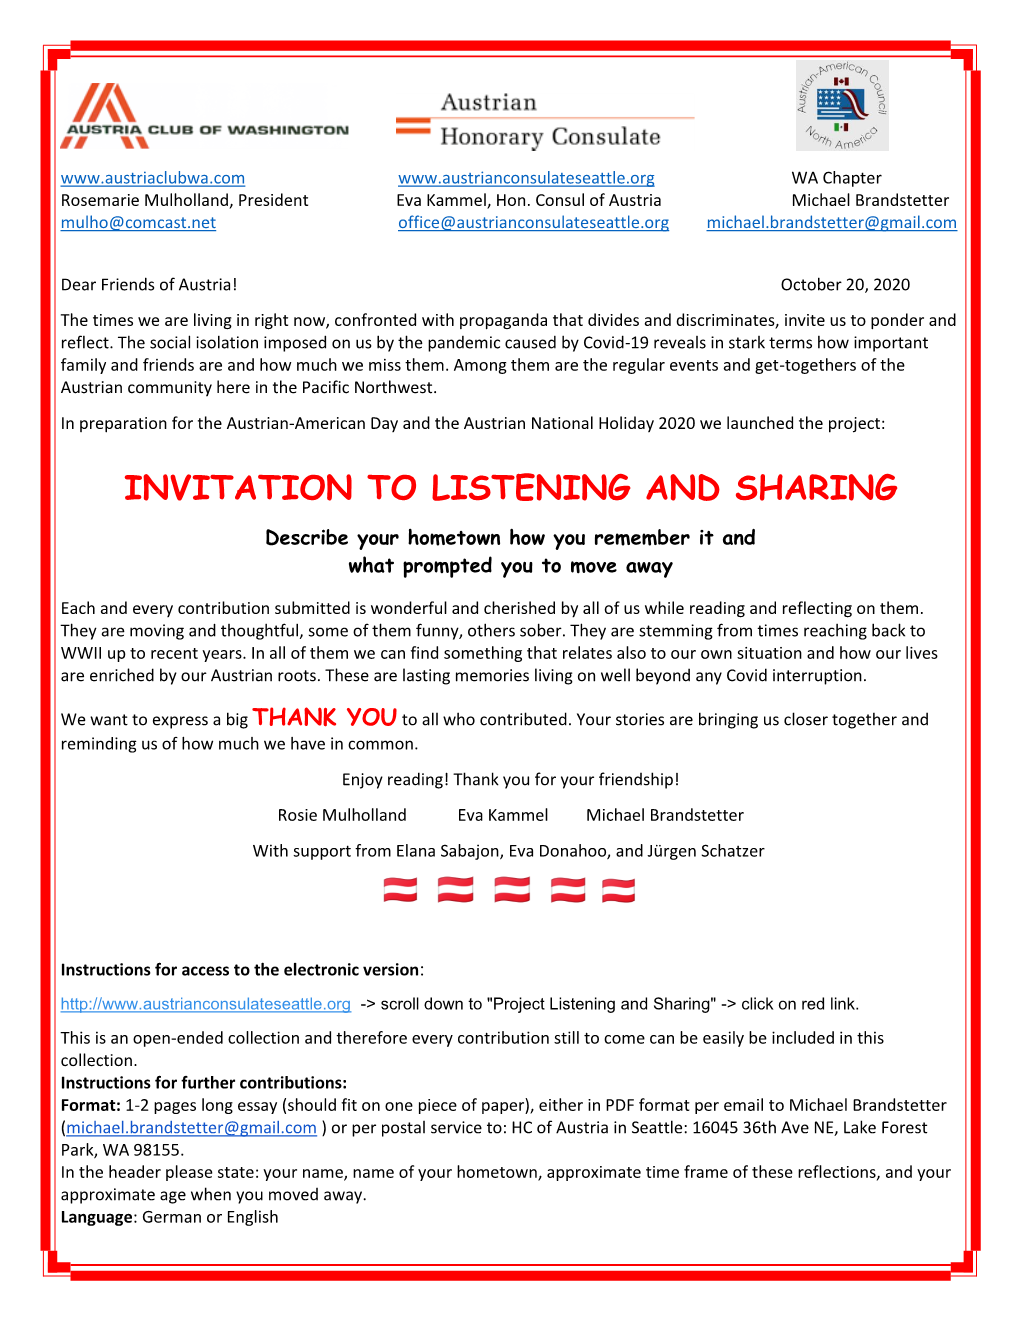 Invitation to Listening and Sharing